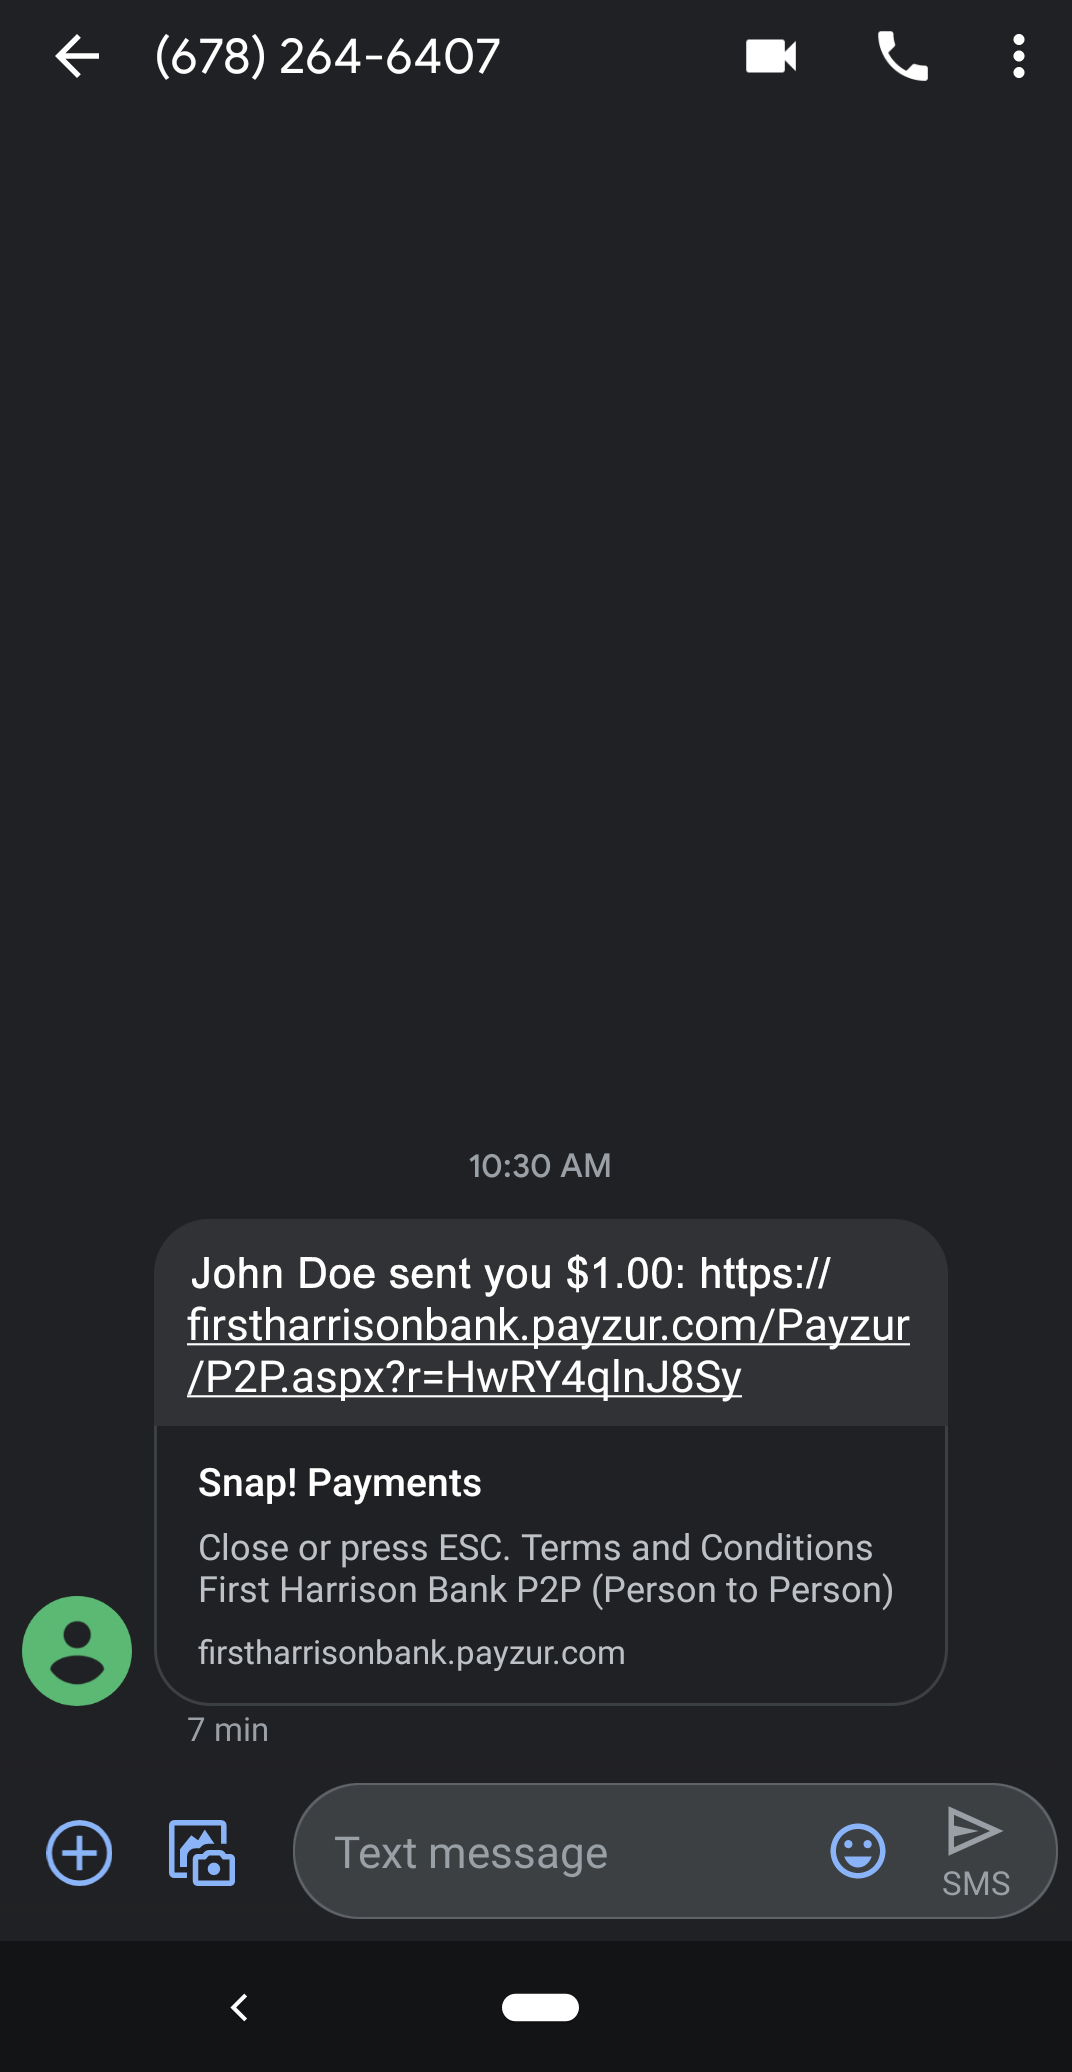 How-To Services - Snap Payments Text Received